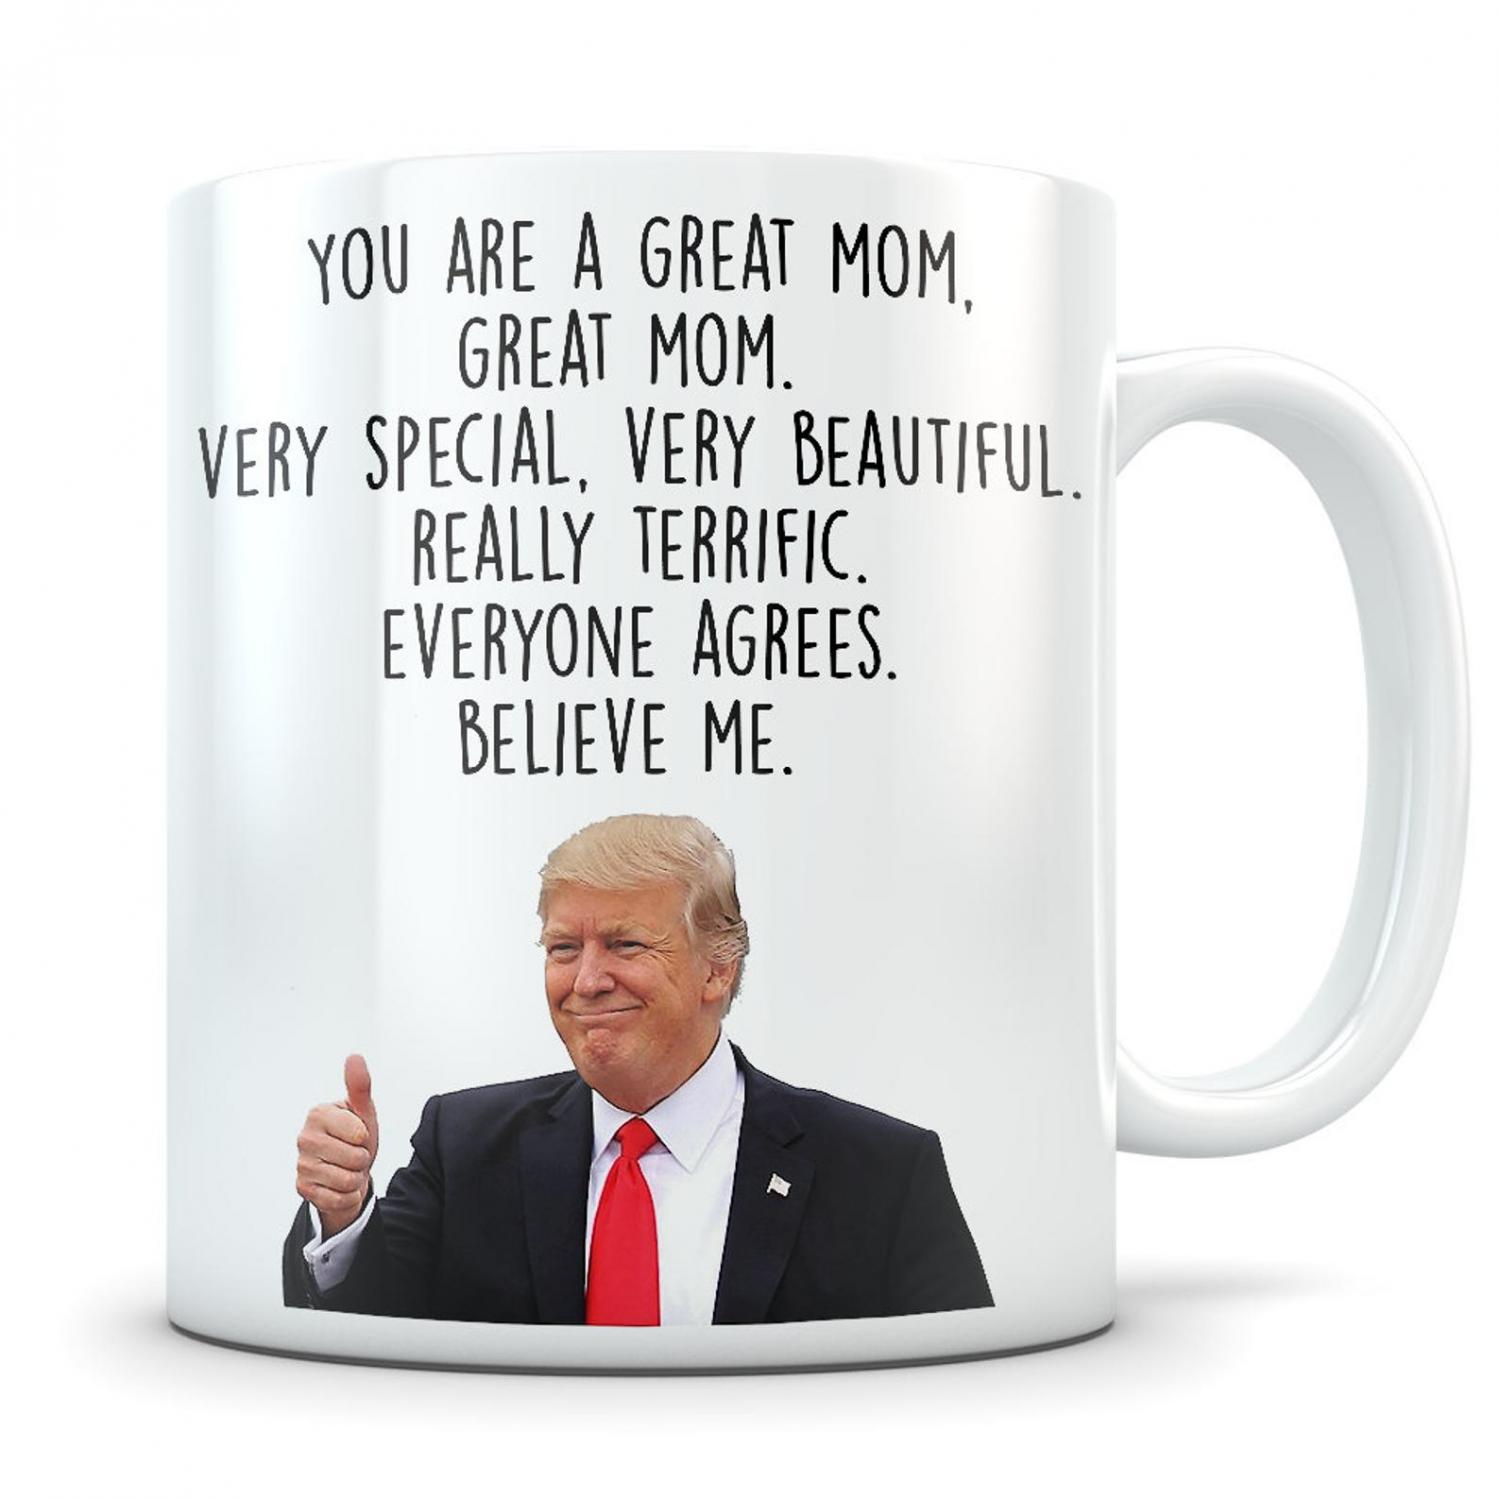 You are a great Mom, Great Mom. Very Special, very beautiful, really terrific. Everyone Agrees. Believe Me. (Donald Trump Mothers Day Mug) - Funny mothers day coffee mug